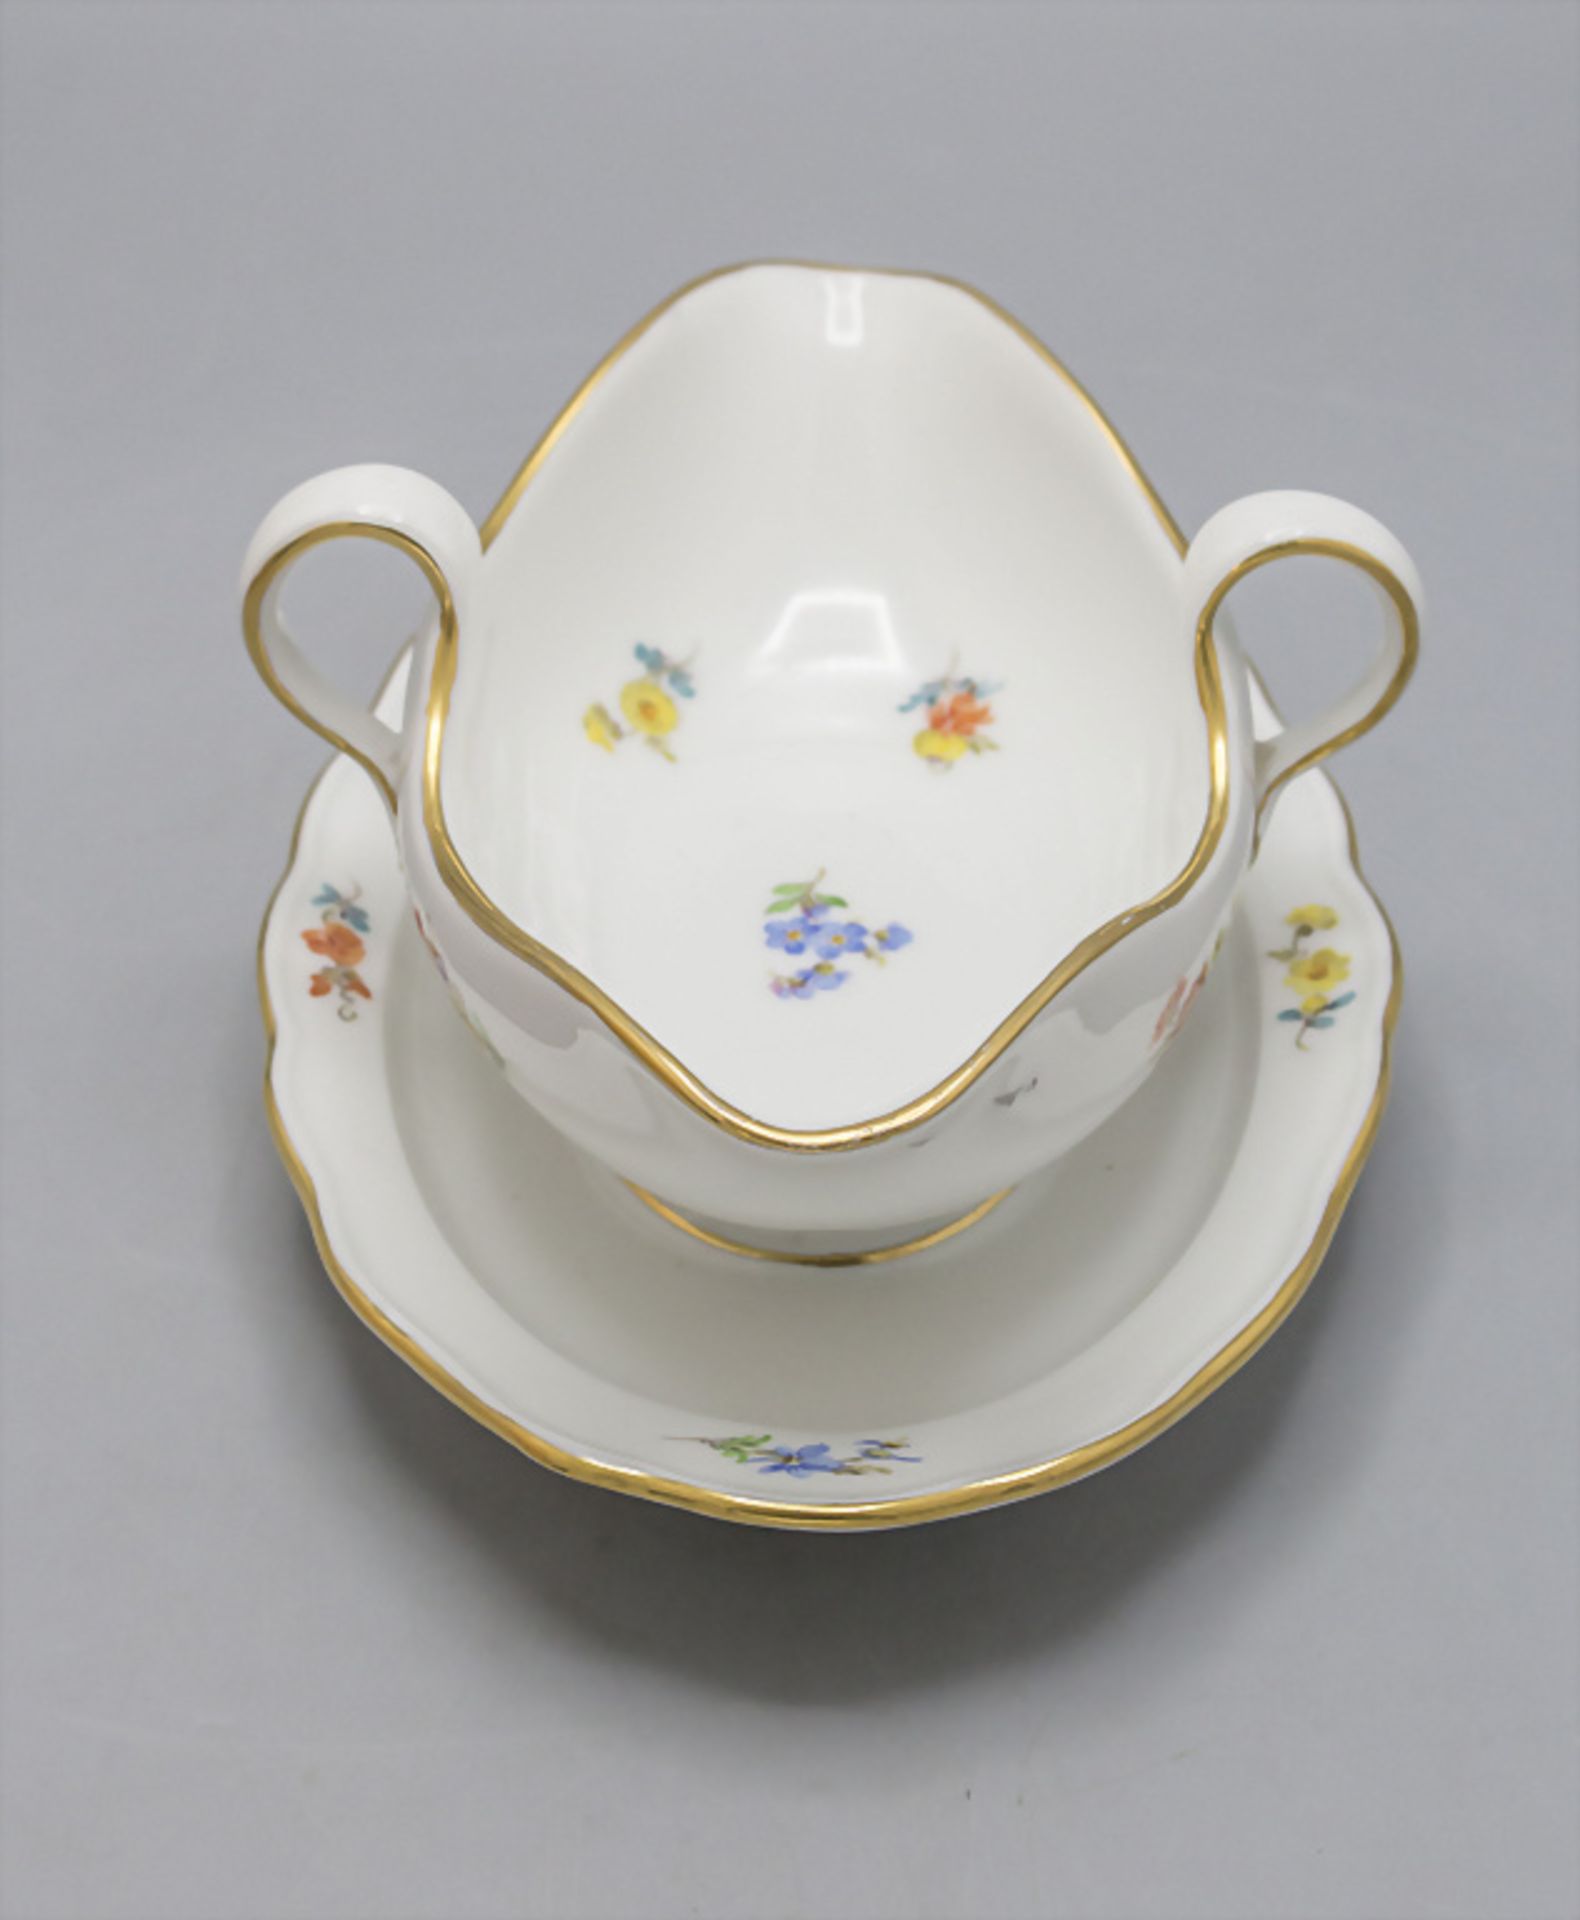 Sauciere mit Streublumen / A sauce boat with scattered flowers, Meissen, wohl 20. Jh. - Image 2 of 5